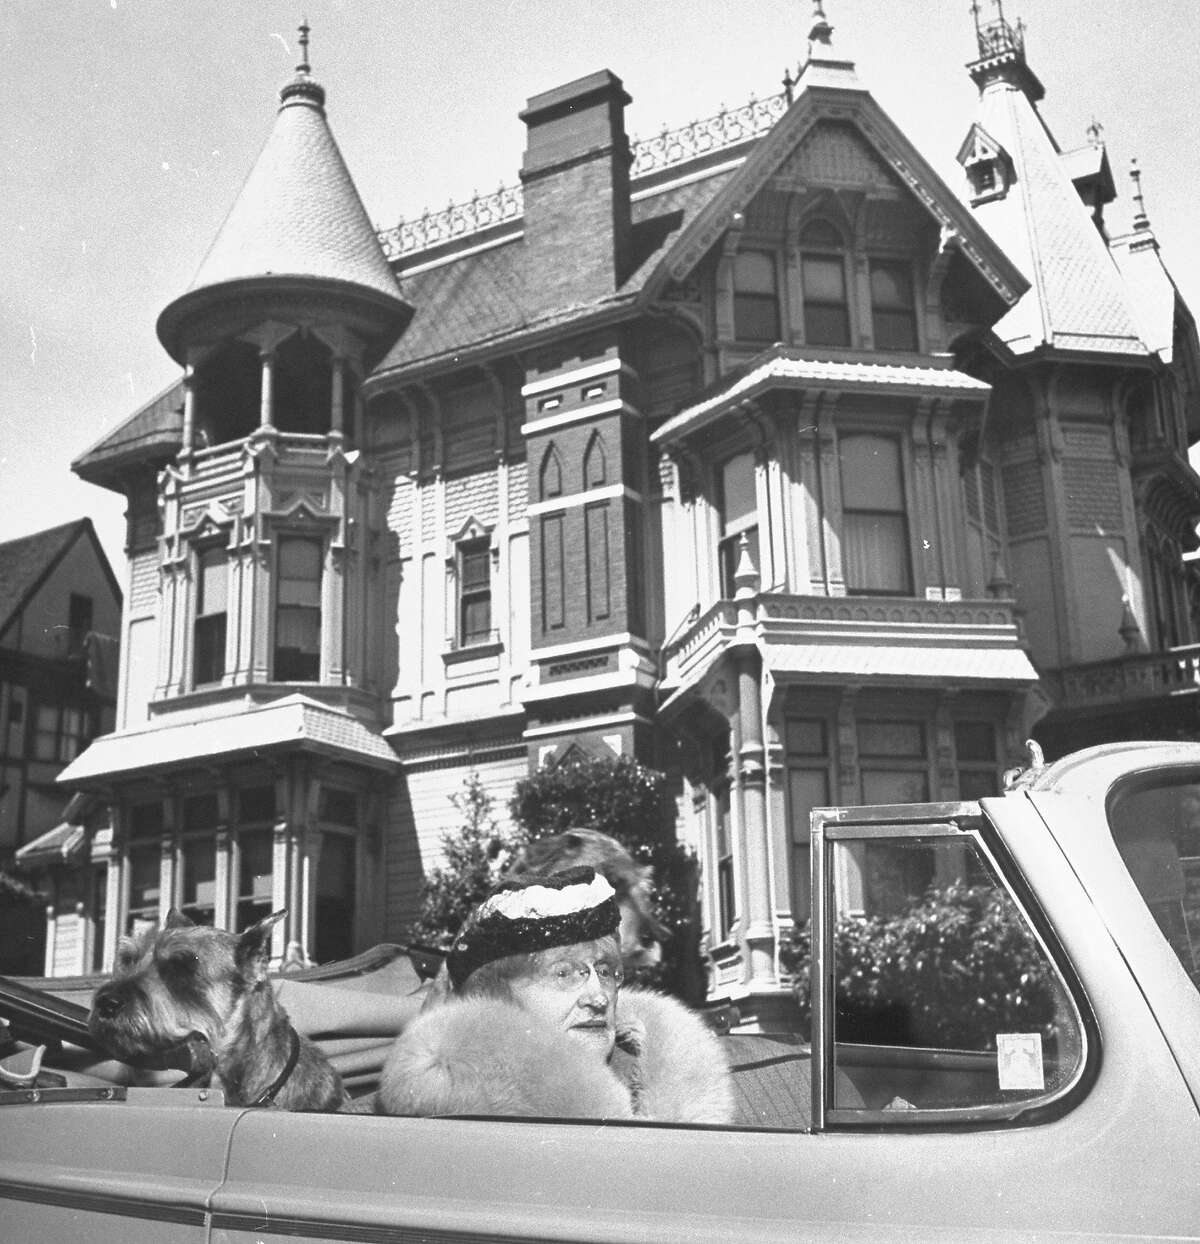 Gertrude Atherton's apartment. Gertrude Atherton and her dog sitting in an automobile outside her home. (Photo by Nat Farbman/The LIFE Picture Collection/Getty Images)